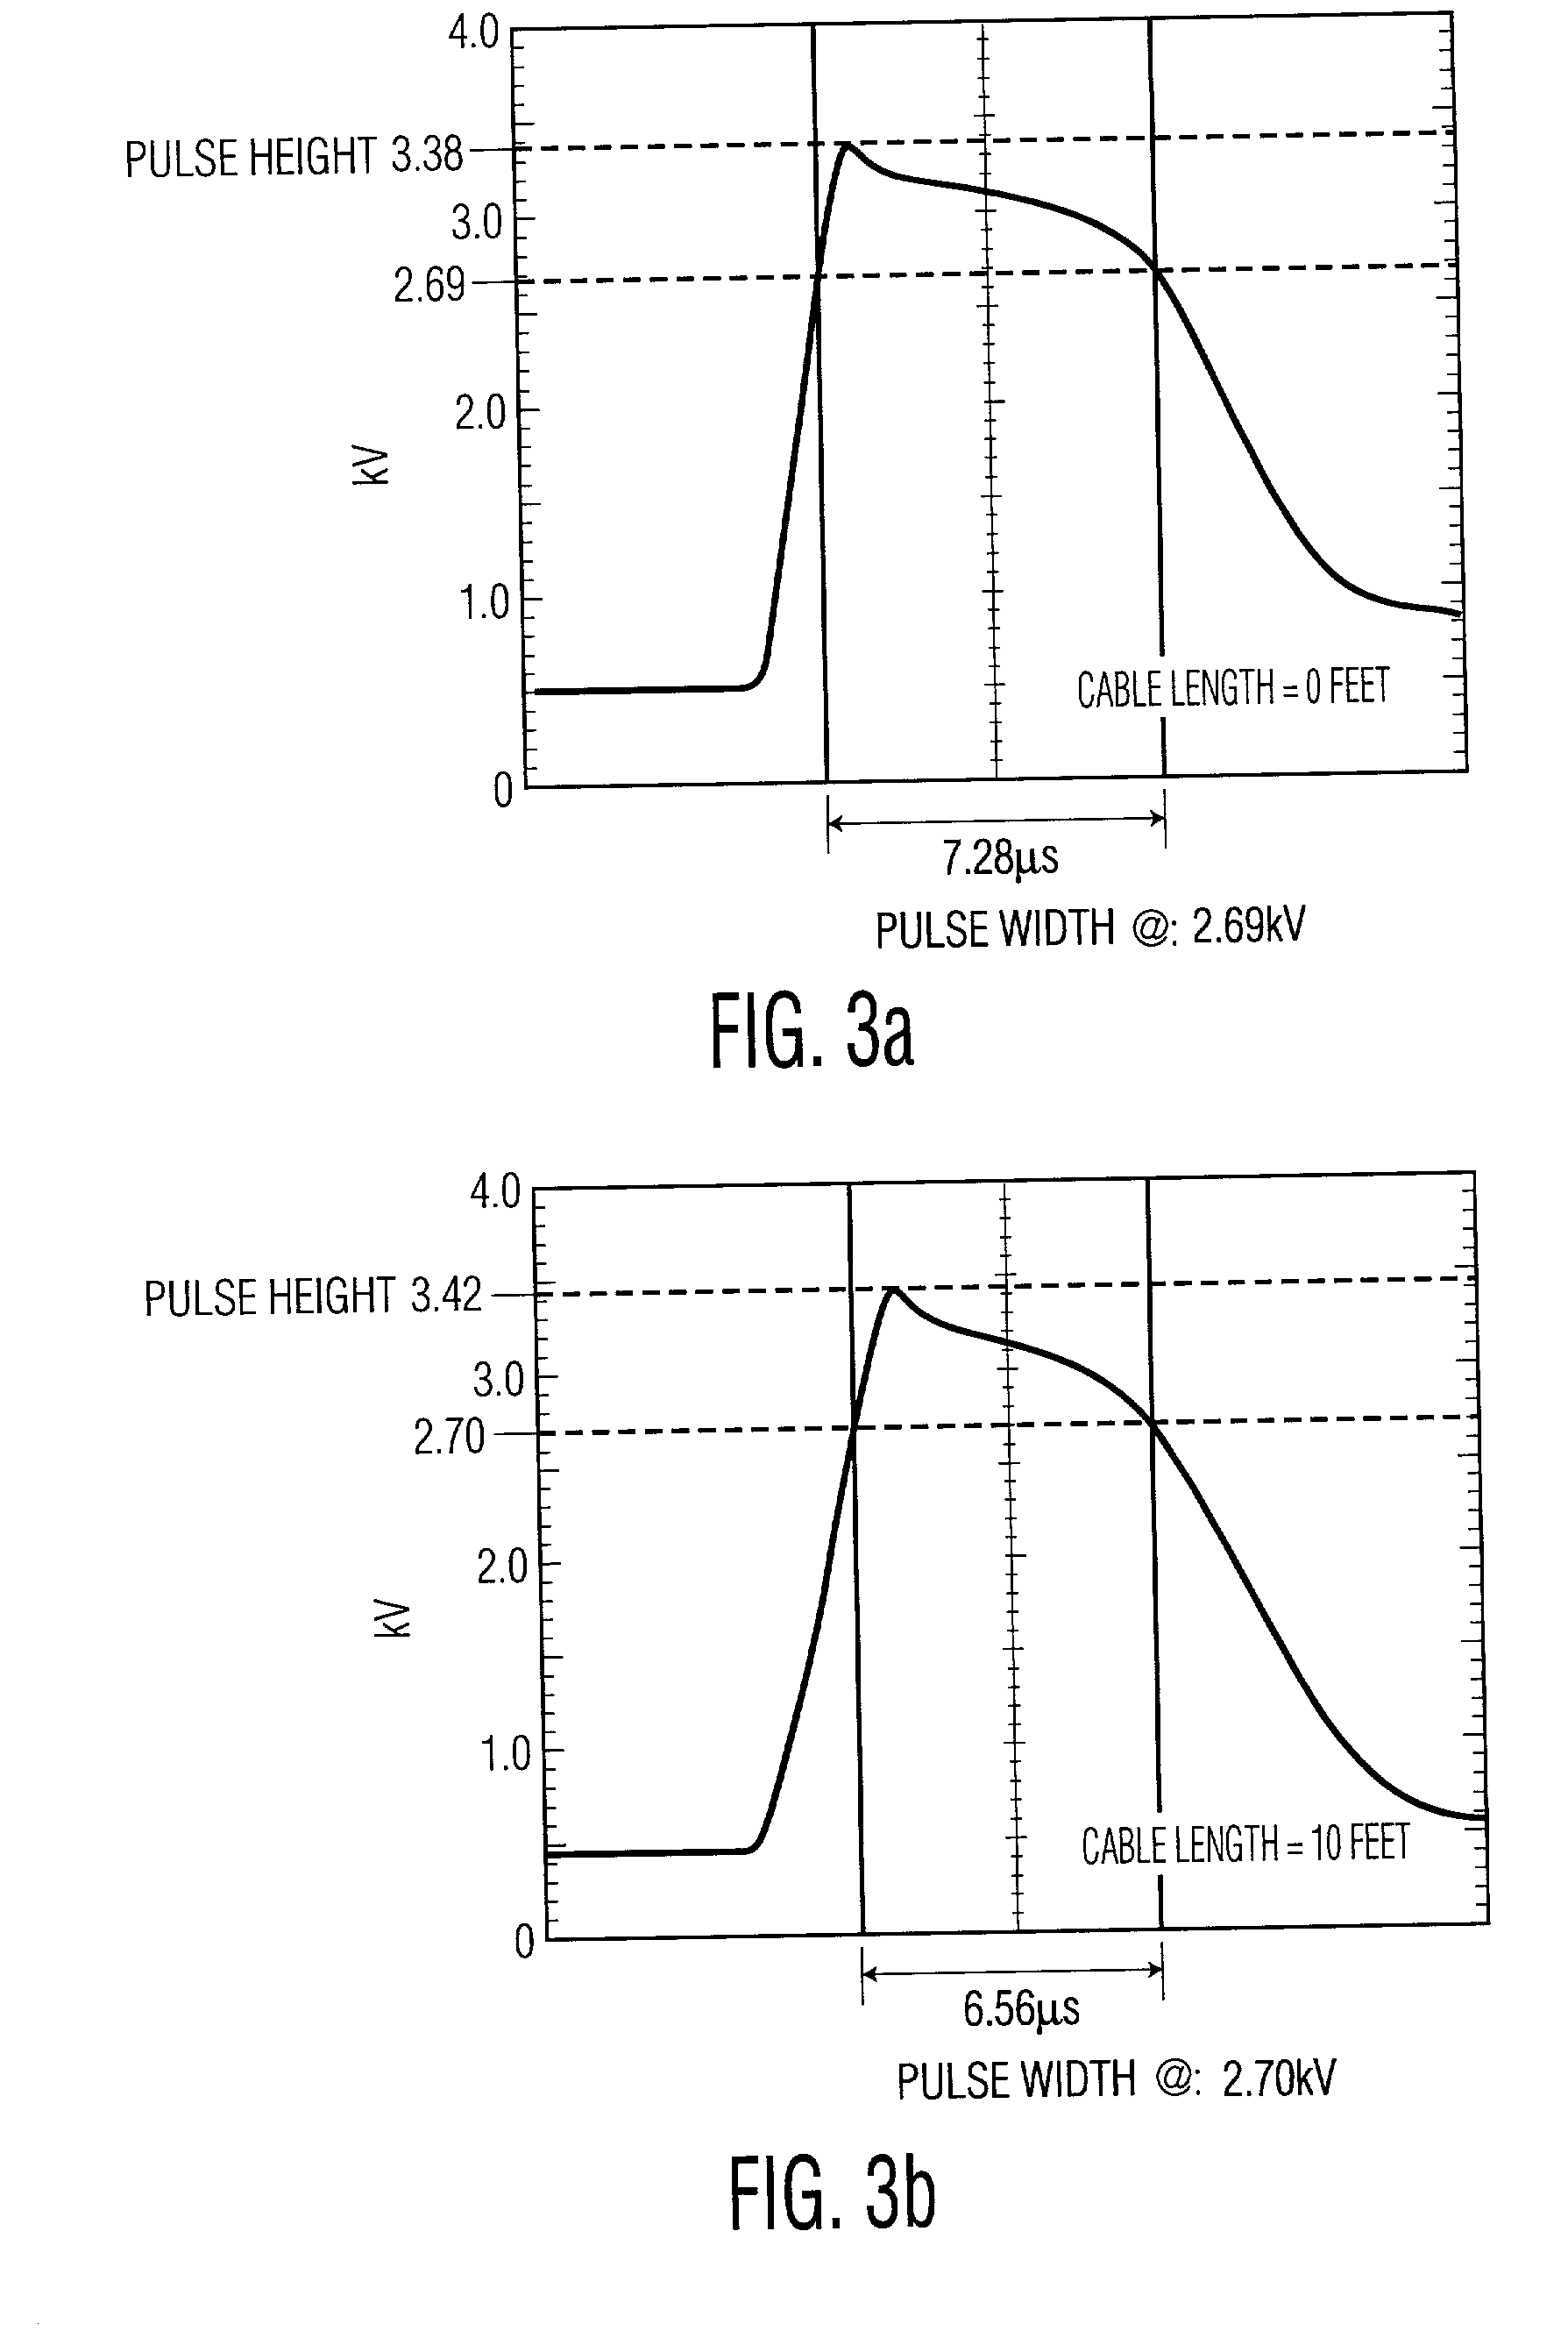 Lamp ignition with automatic compensation for parasitic capacitance